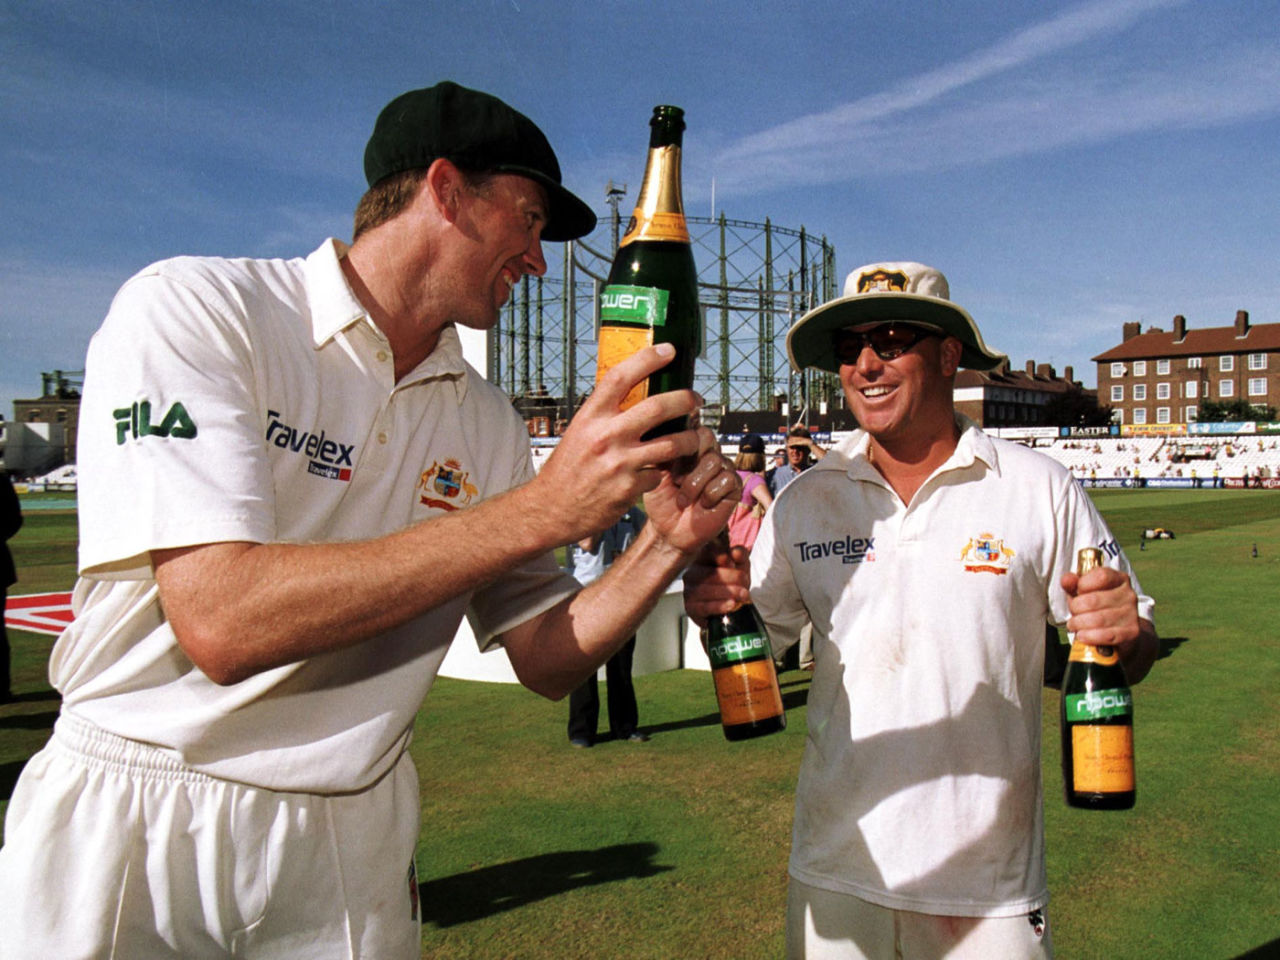 Glenn McGrath and Shane Warne celebrate the innings win, 5th Test, The Oval, August 27, 2001